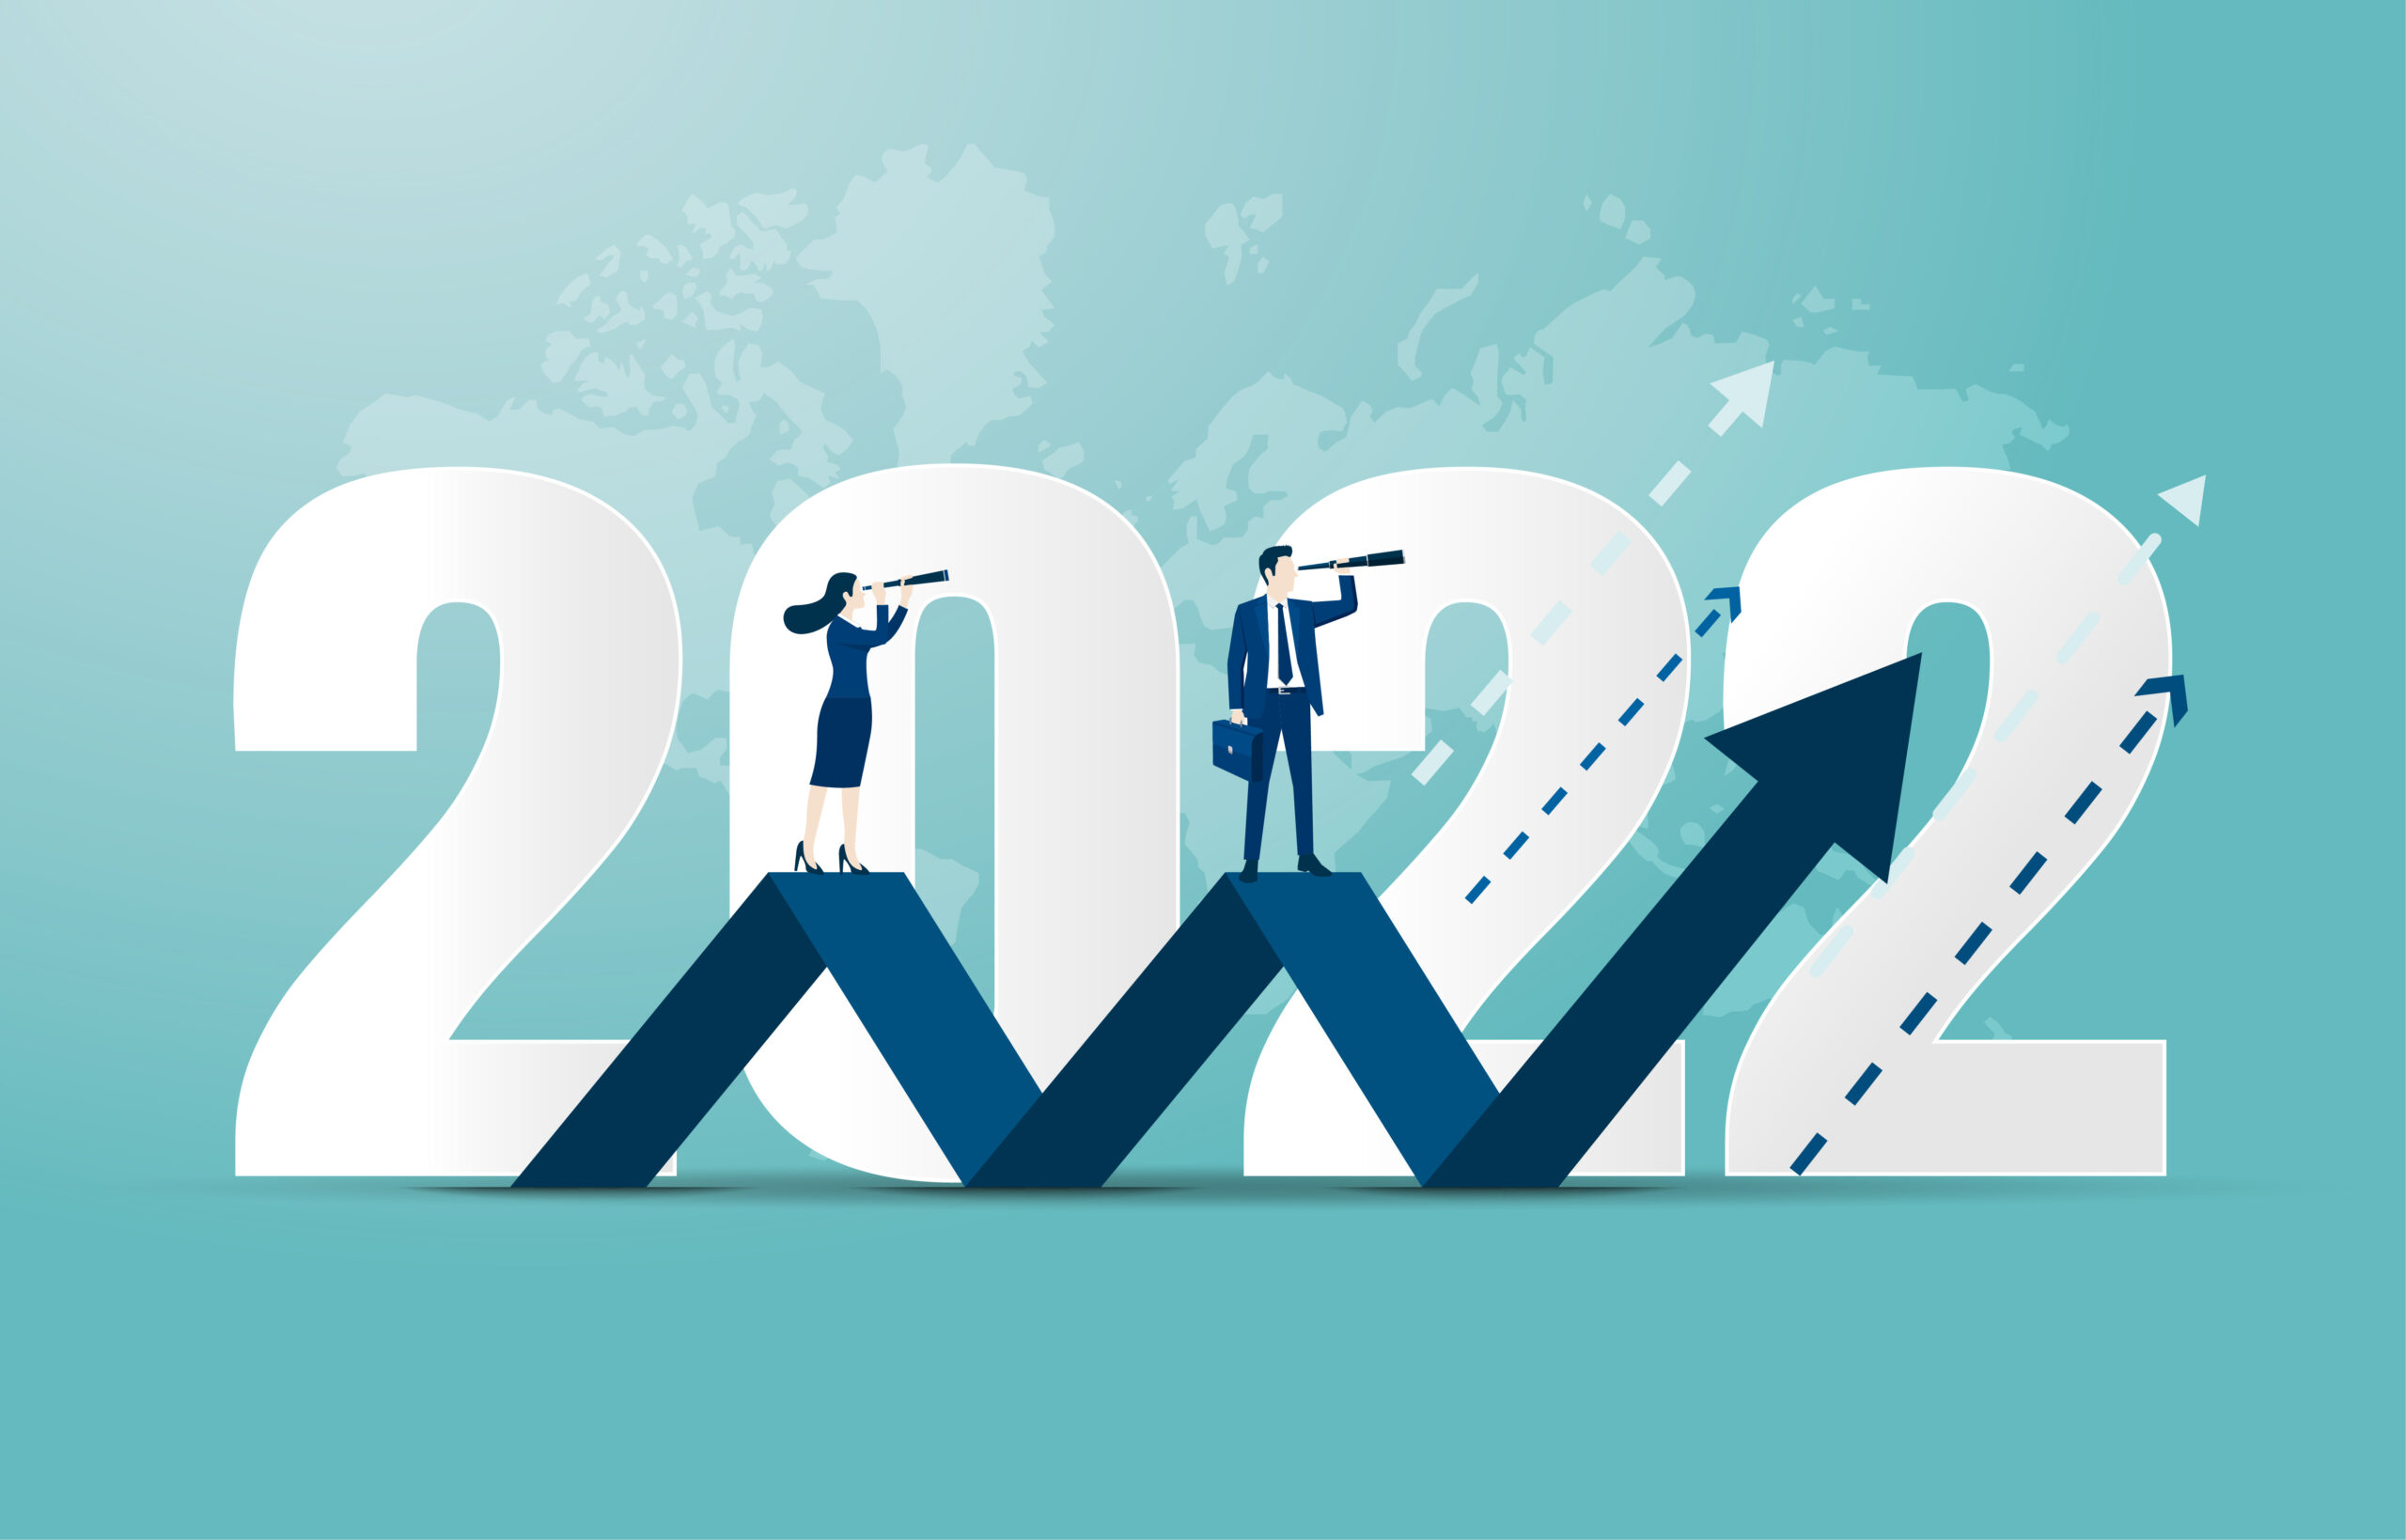 Digital Marketing Trends To Look Out For in 2022